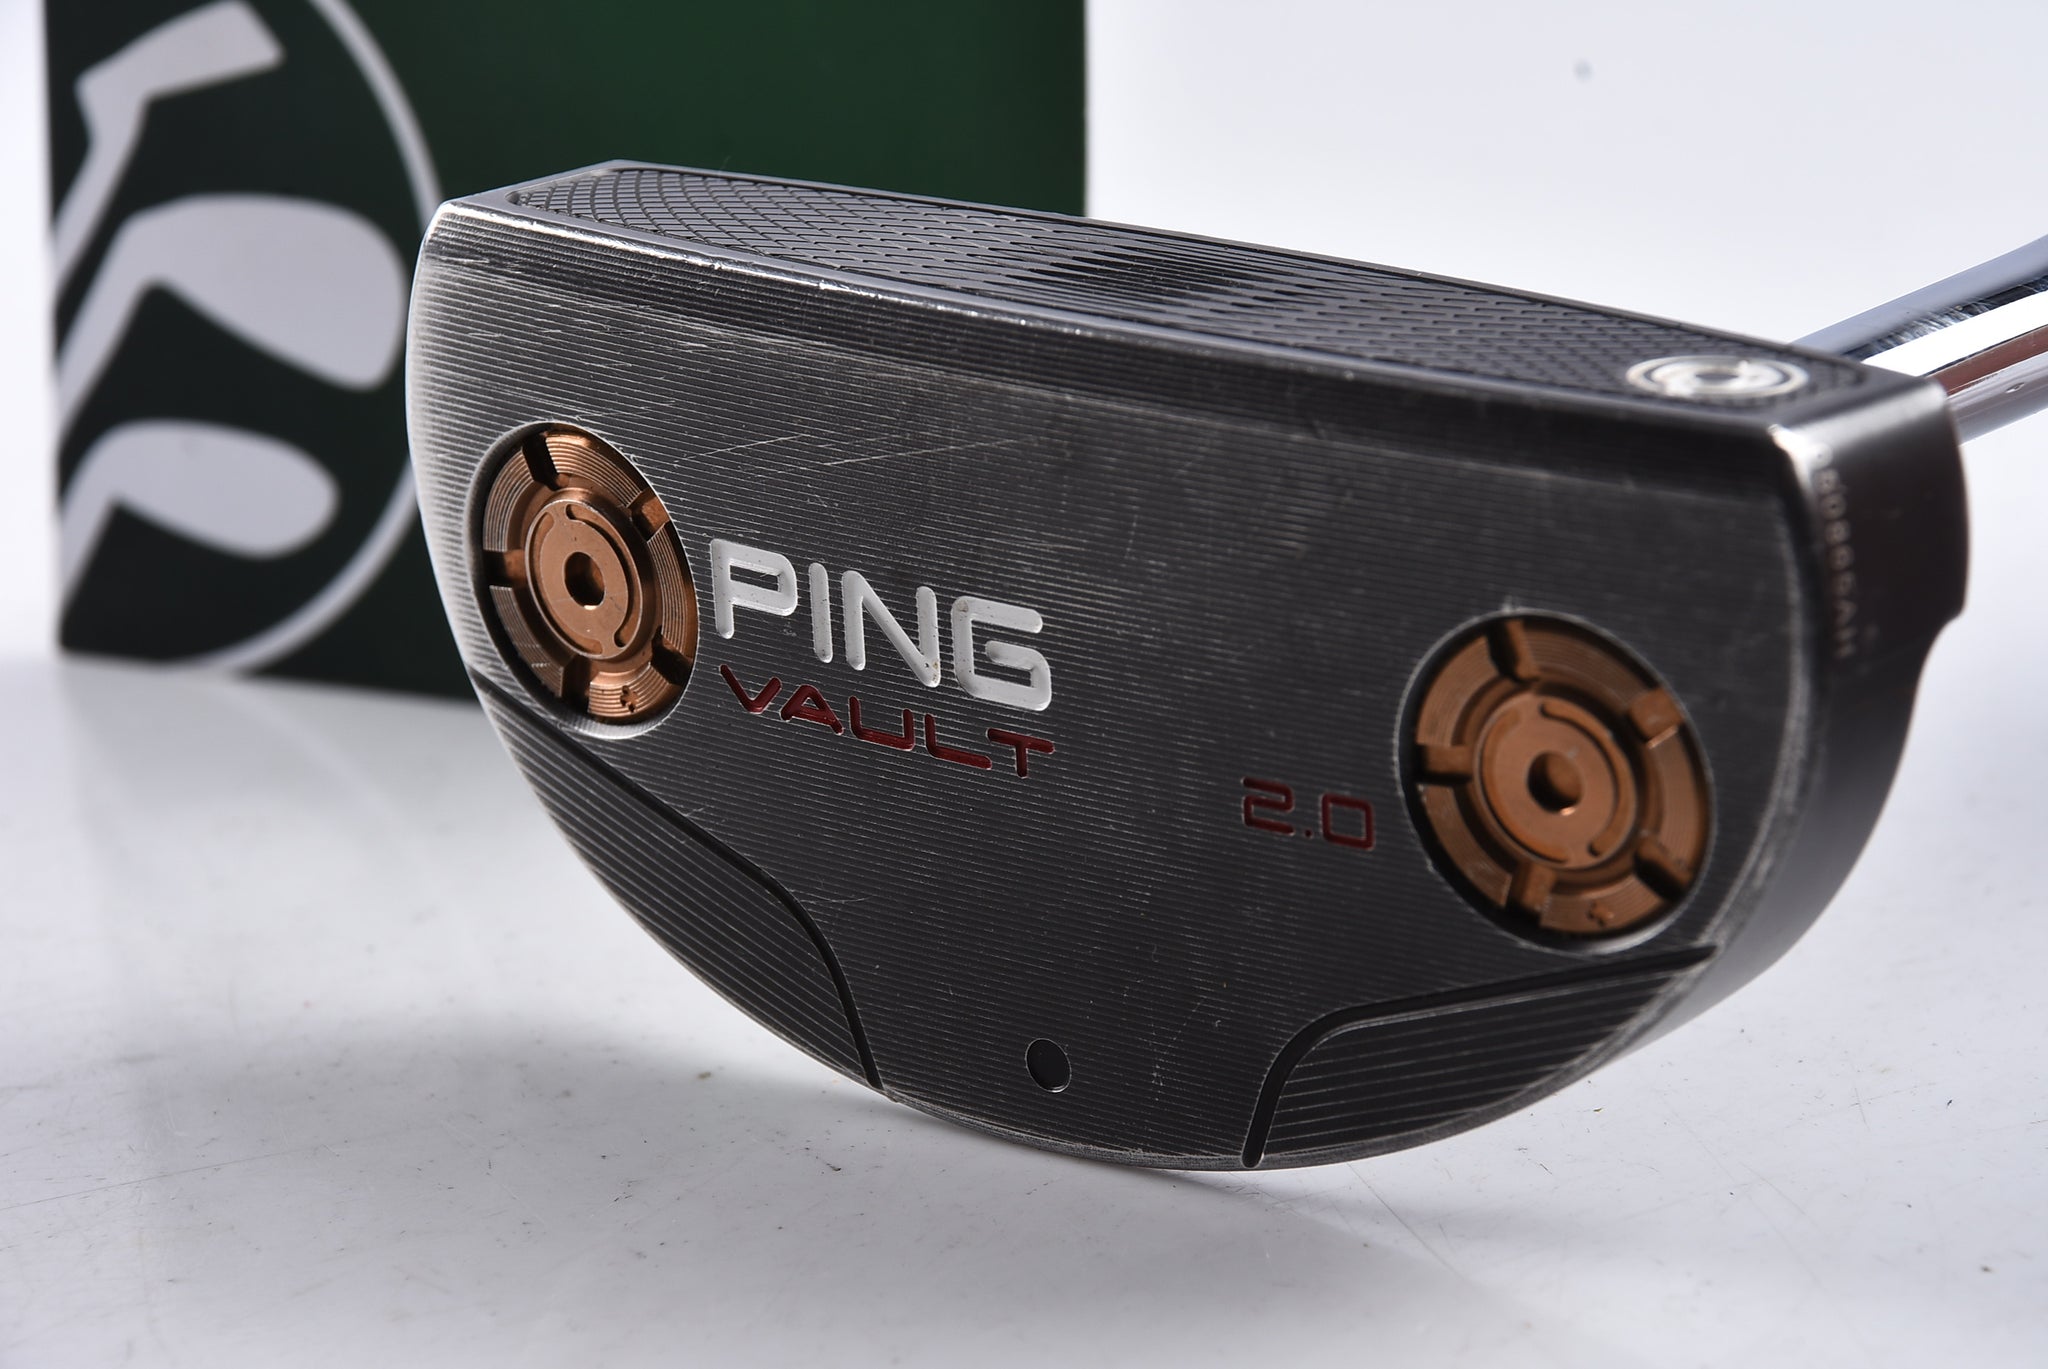 Ping Vault 2.0 Piper Putter / 33 Inch